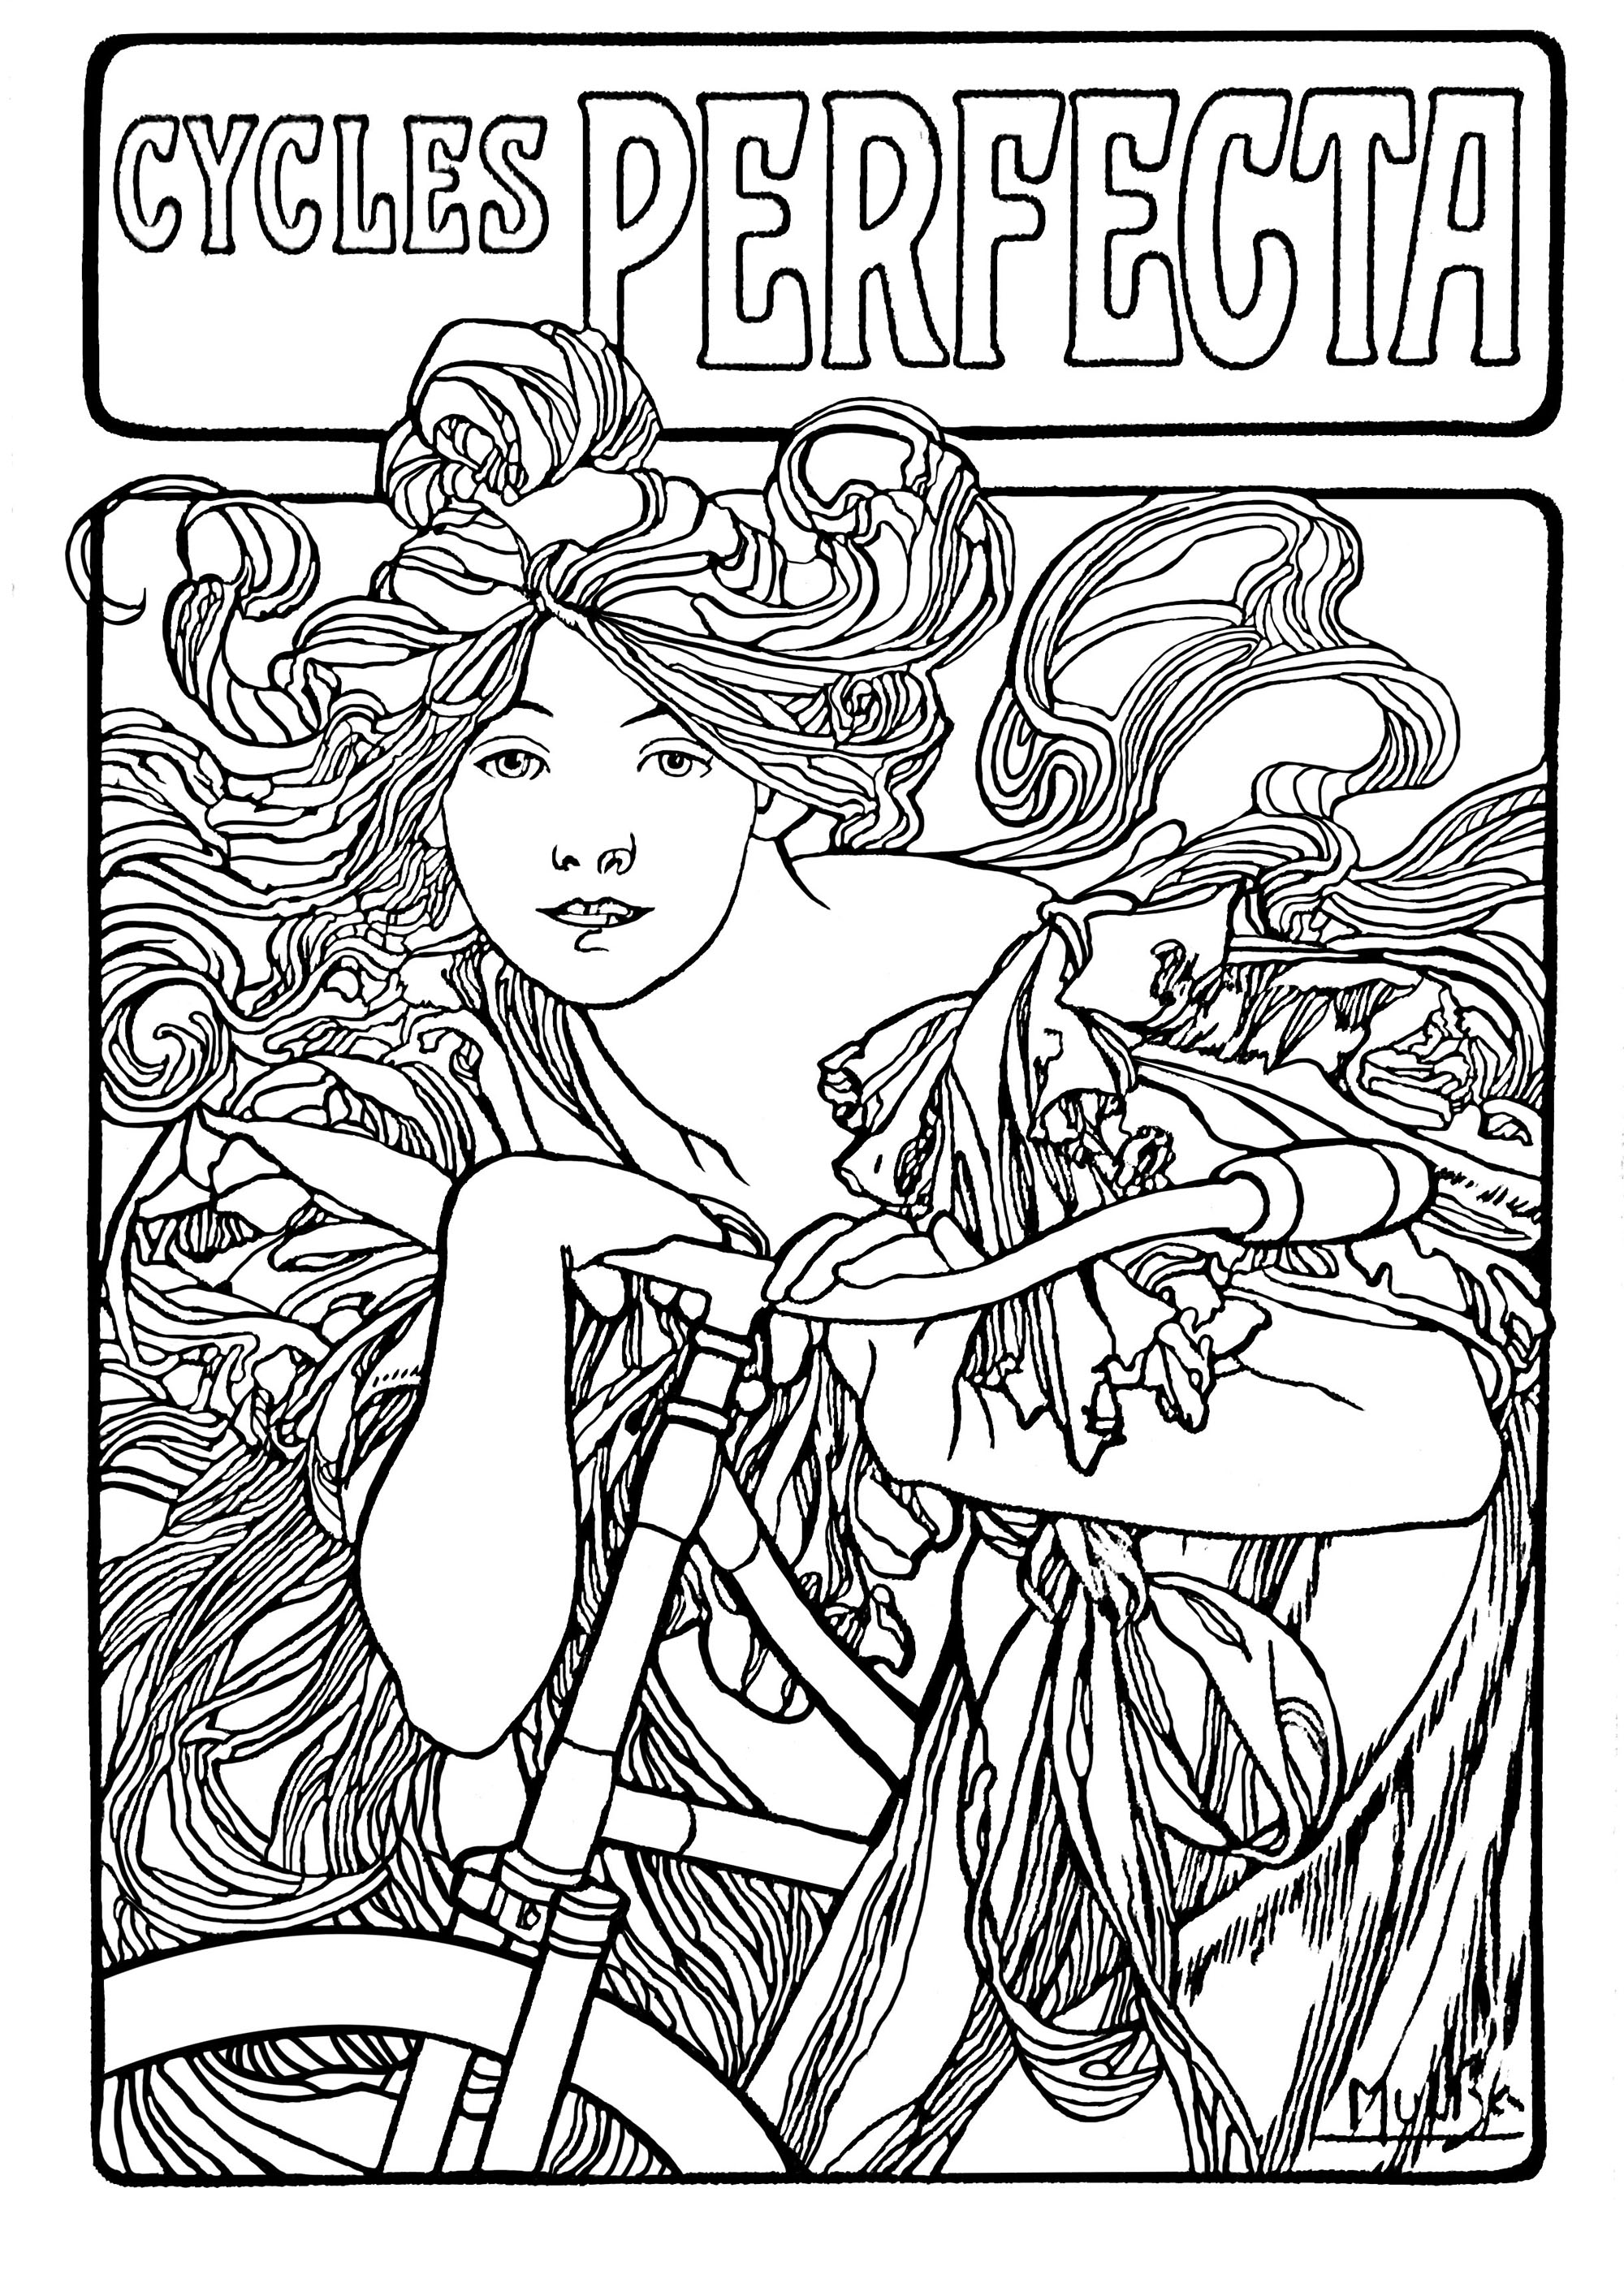 Coloring page created from a poster by Alfons Mucha for the British company Cycles Perfecta (1902), Artist : Olivier